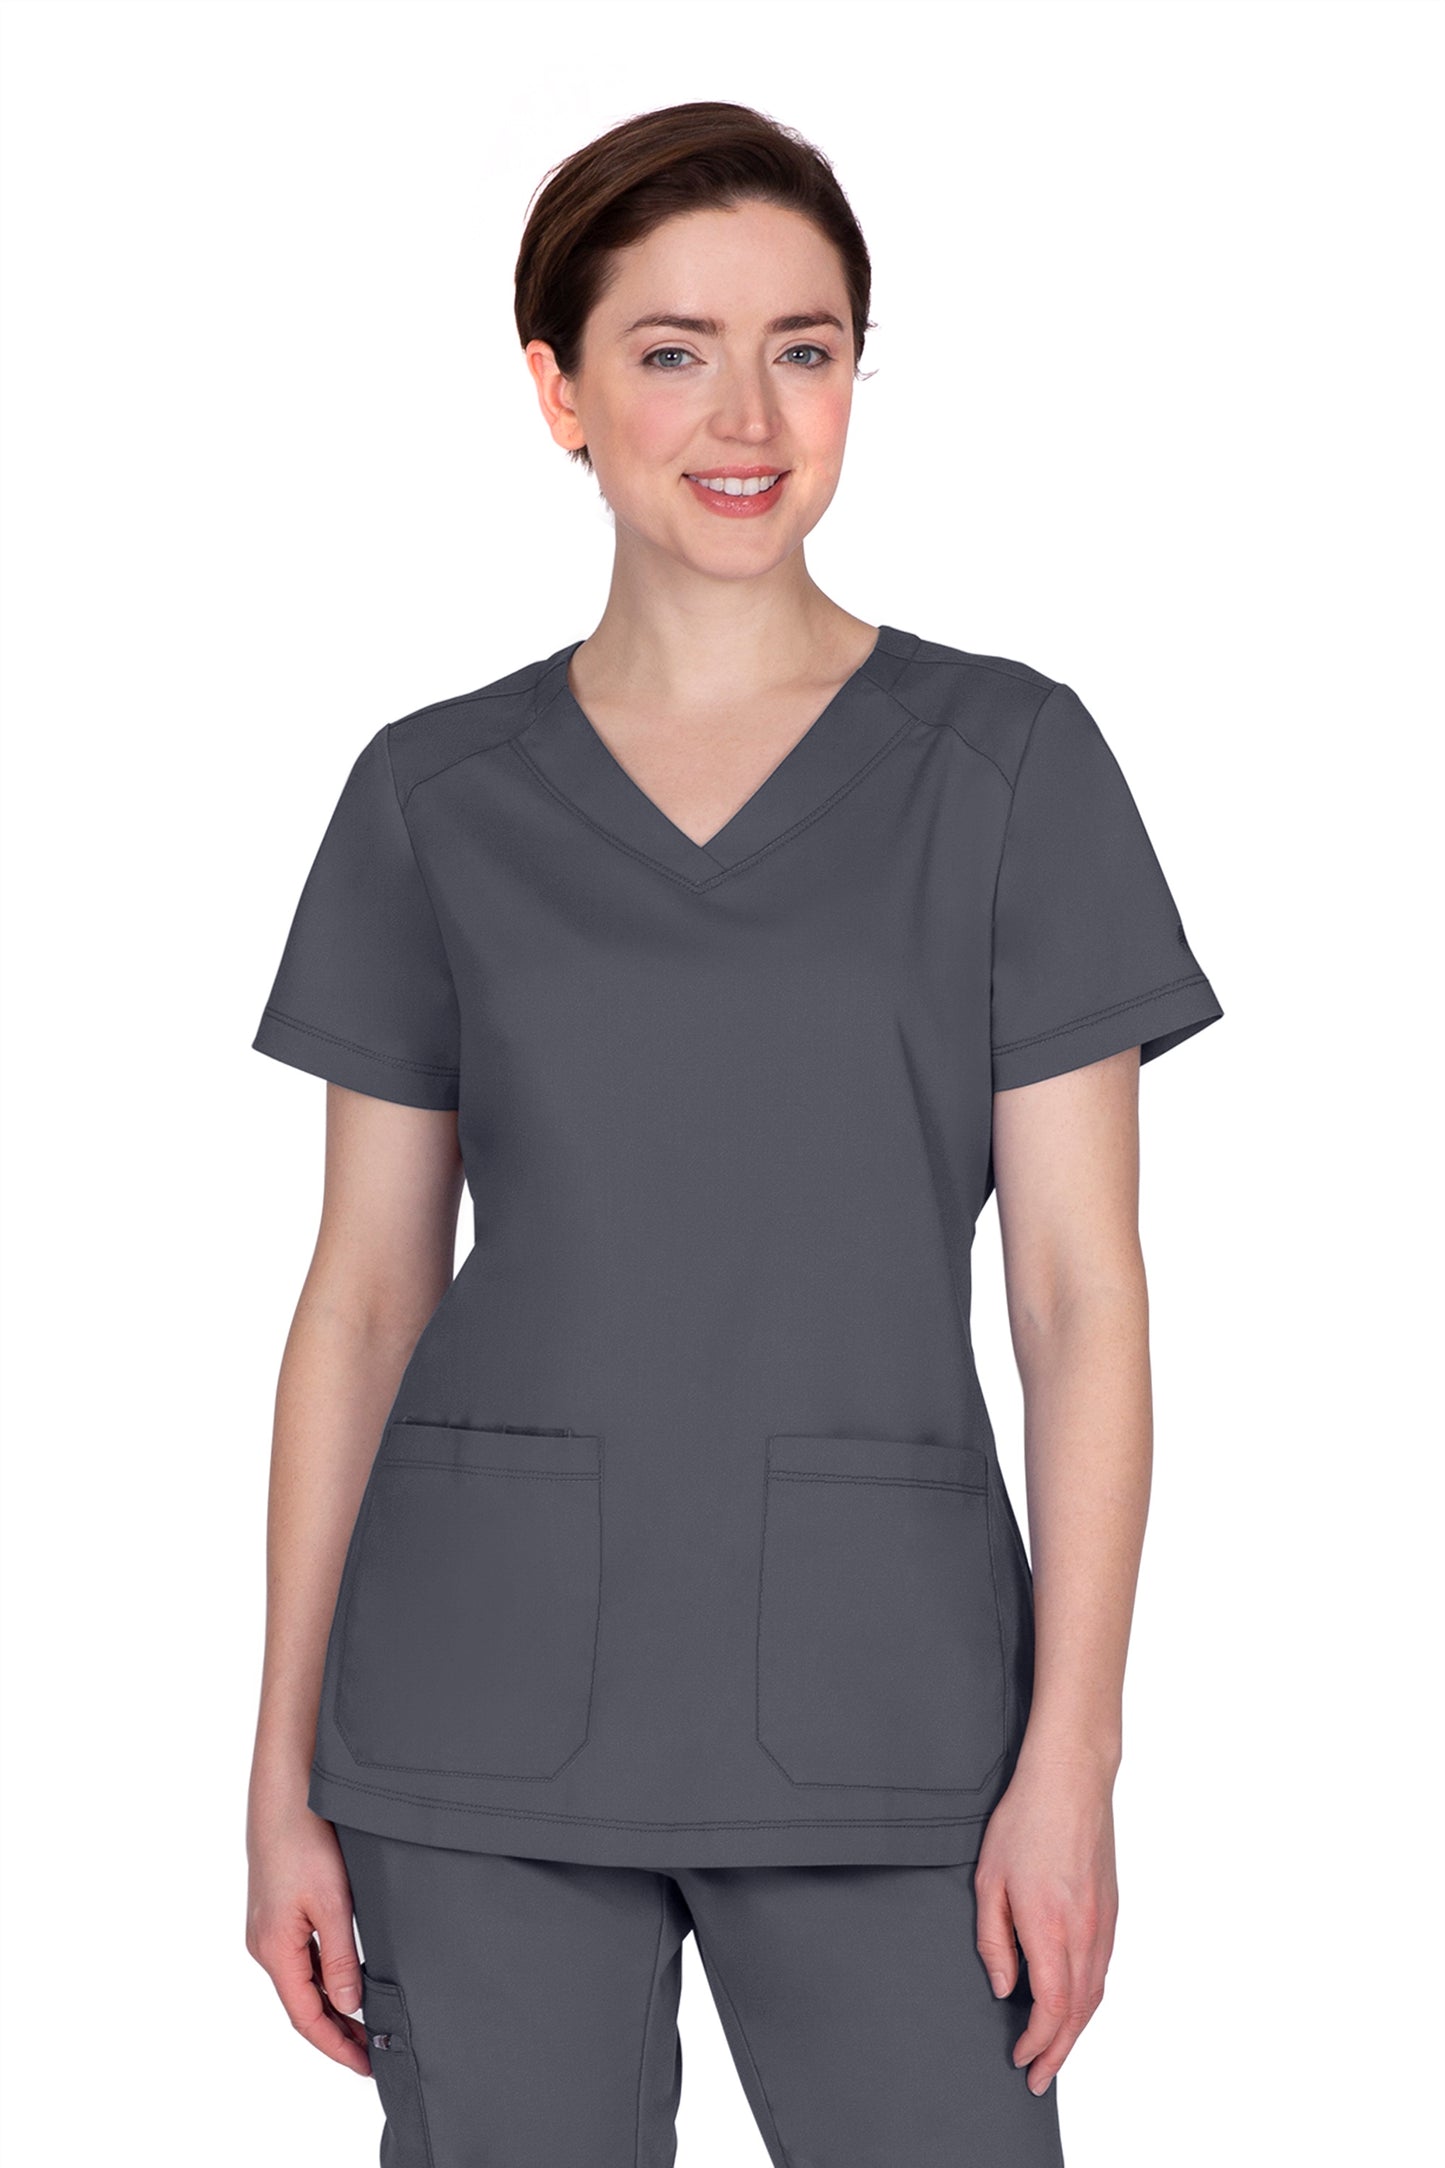 Healing Hands Scrub Top Purple Label Jill in Pewter at Parker's Clothing and Shoes.